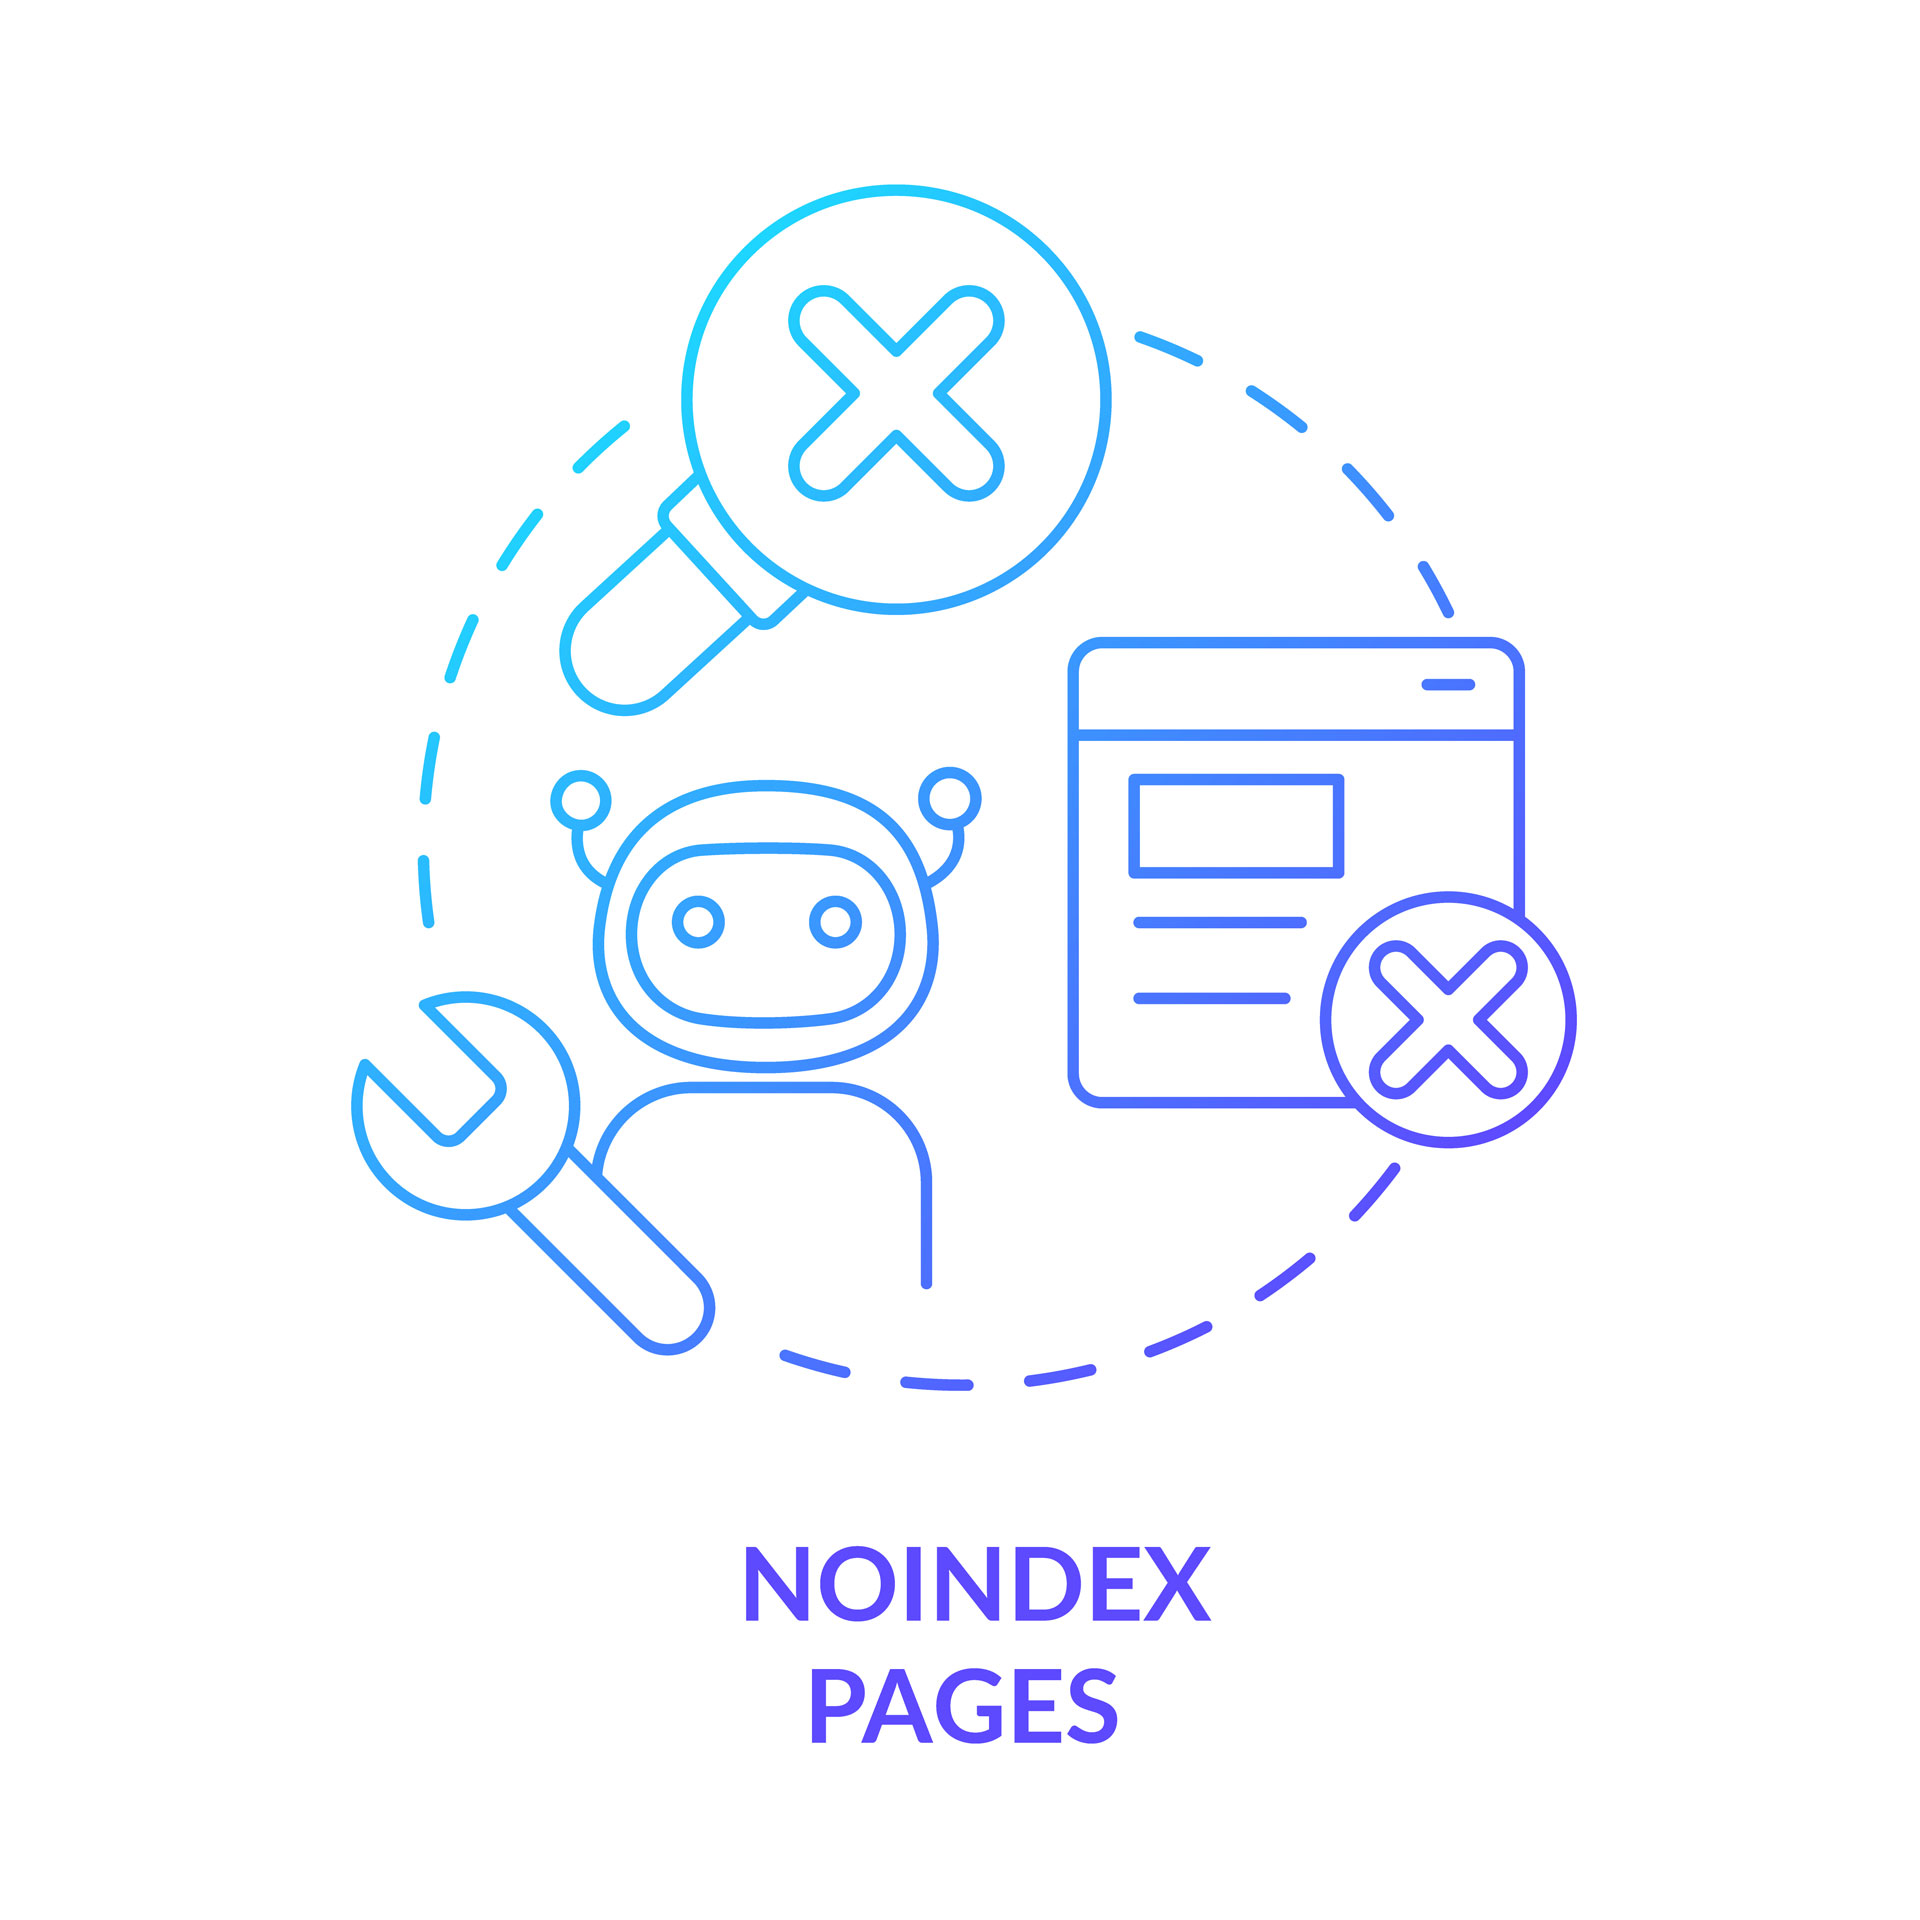 noindex pages text with x icons